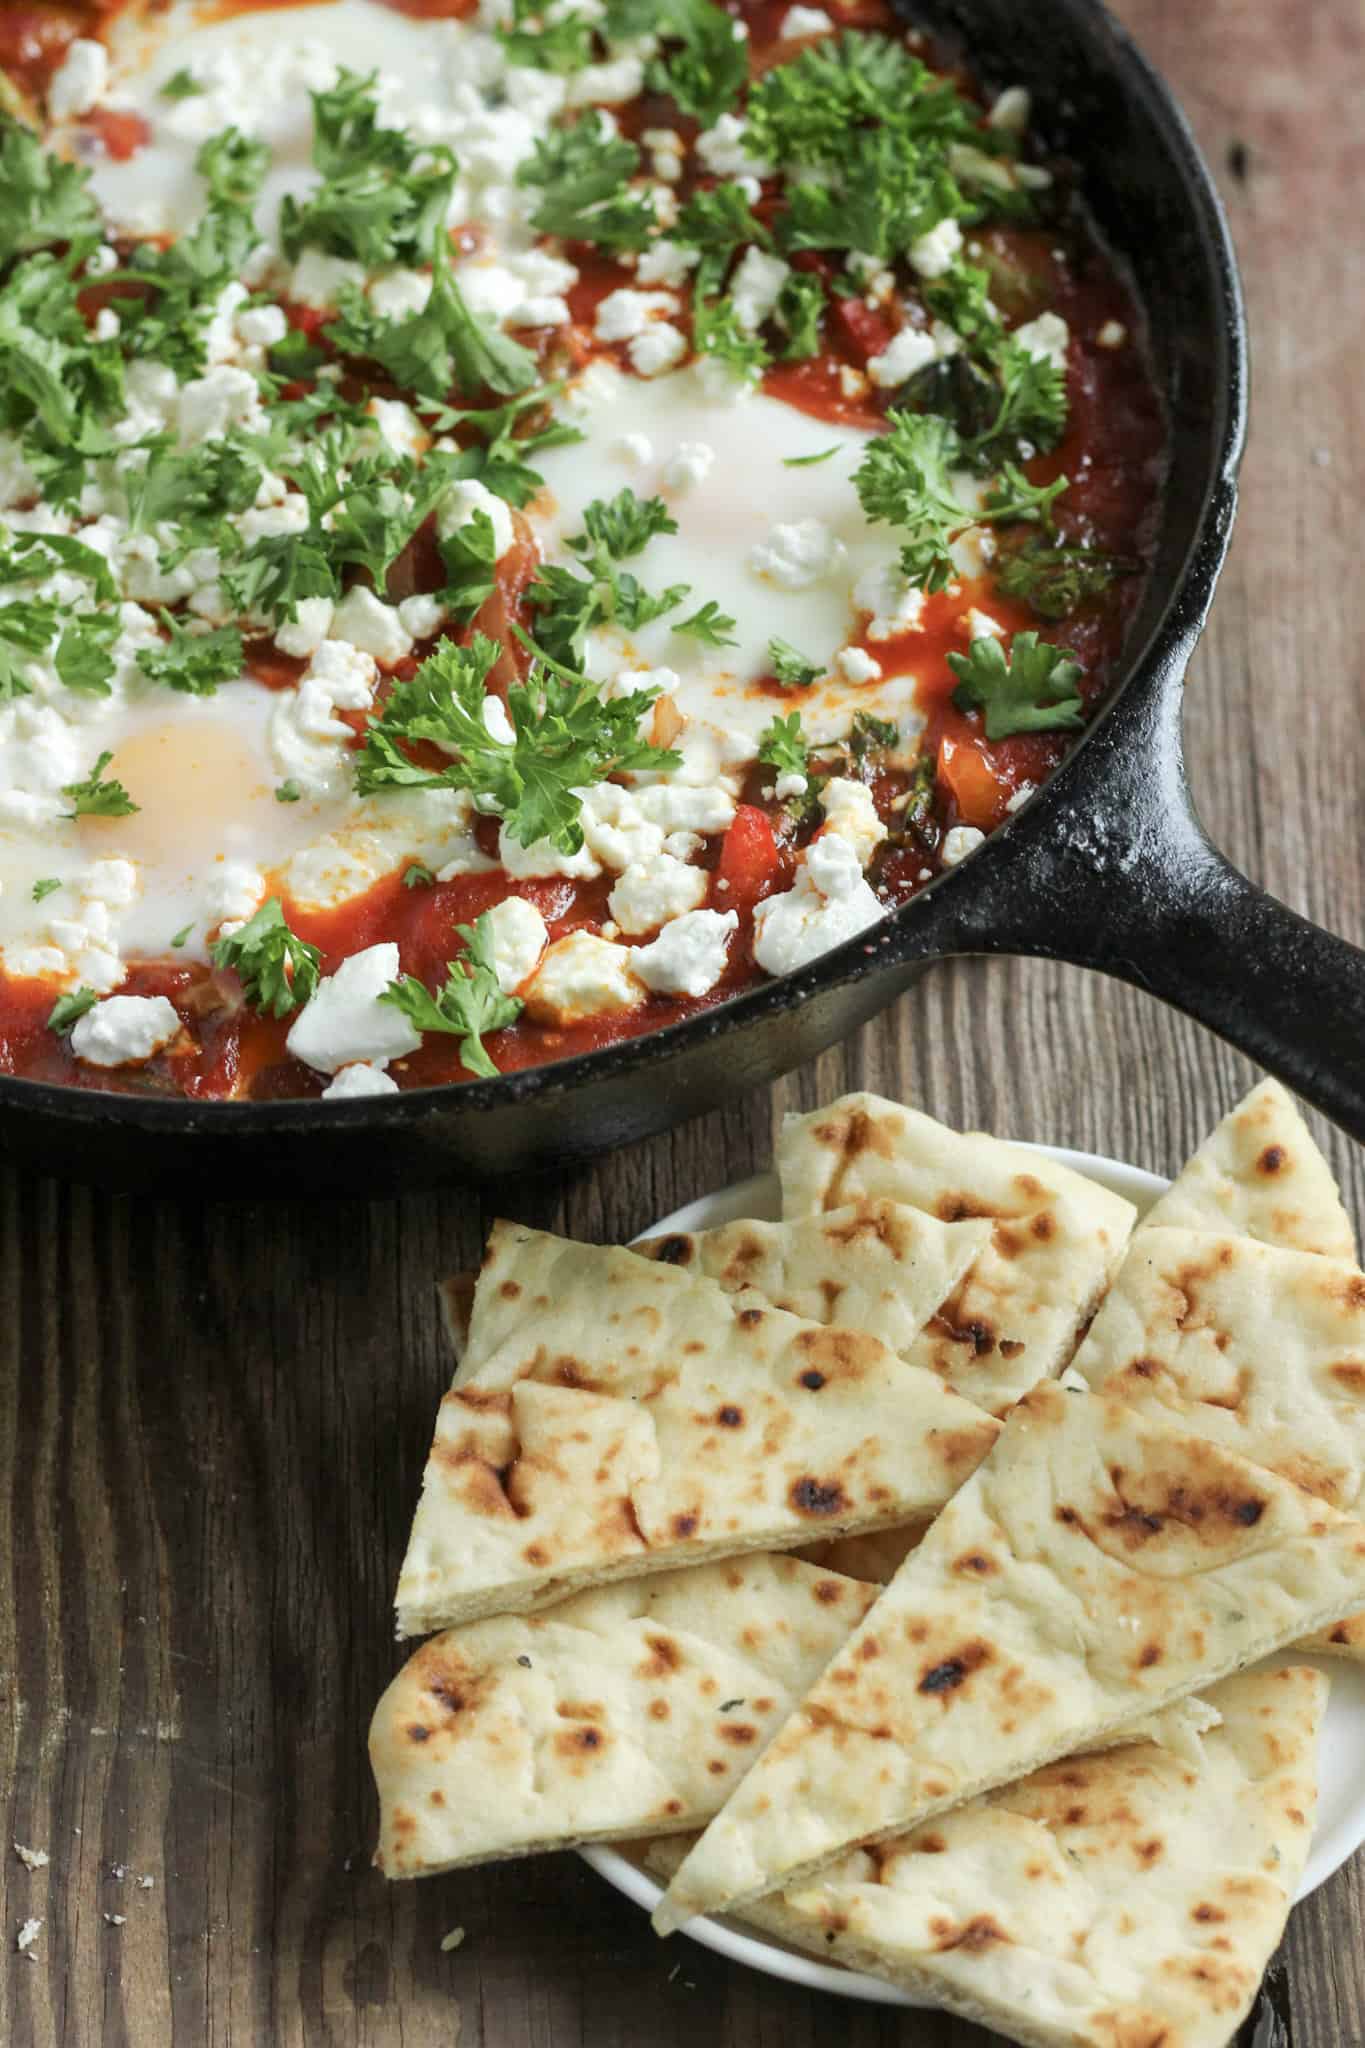 Cast iron skillet with an easy shakshuka recipe on a wooden table with a serving plate of sliced naan